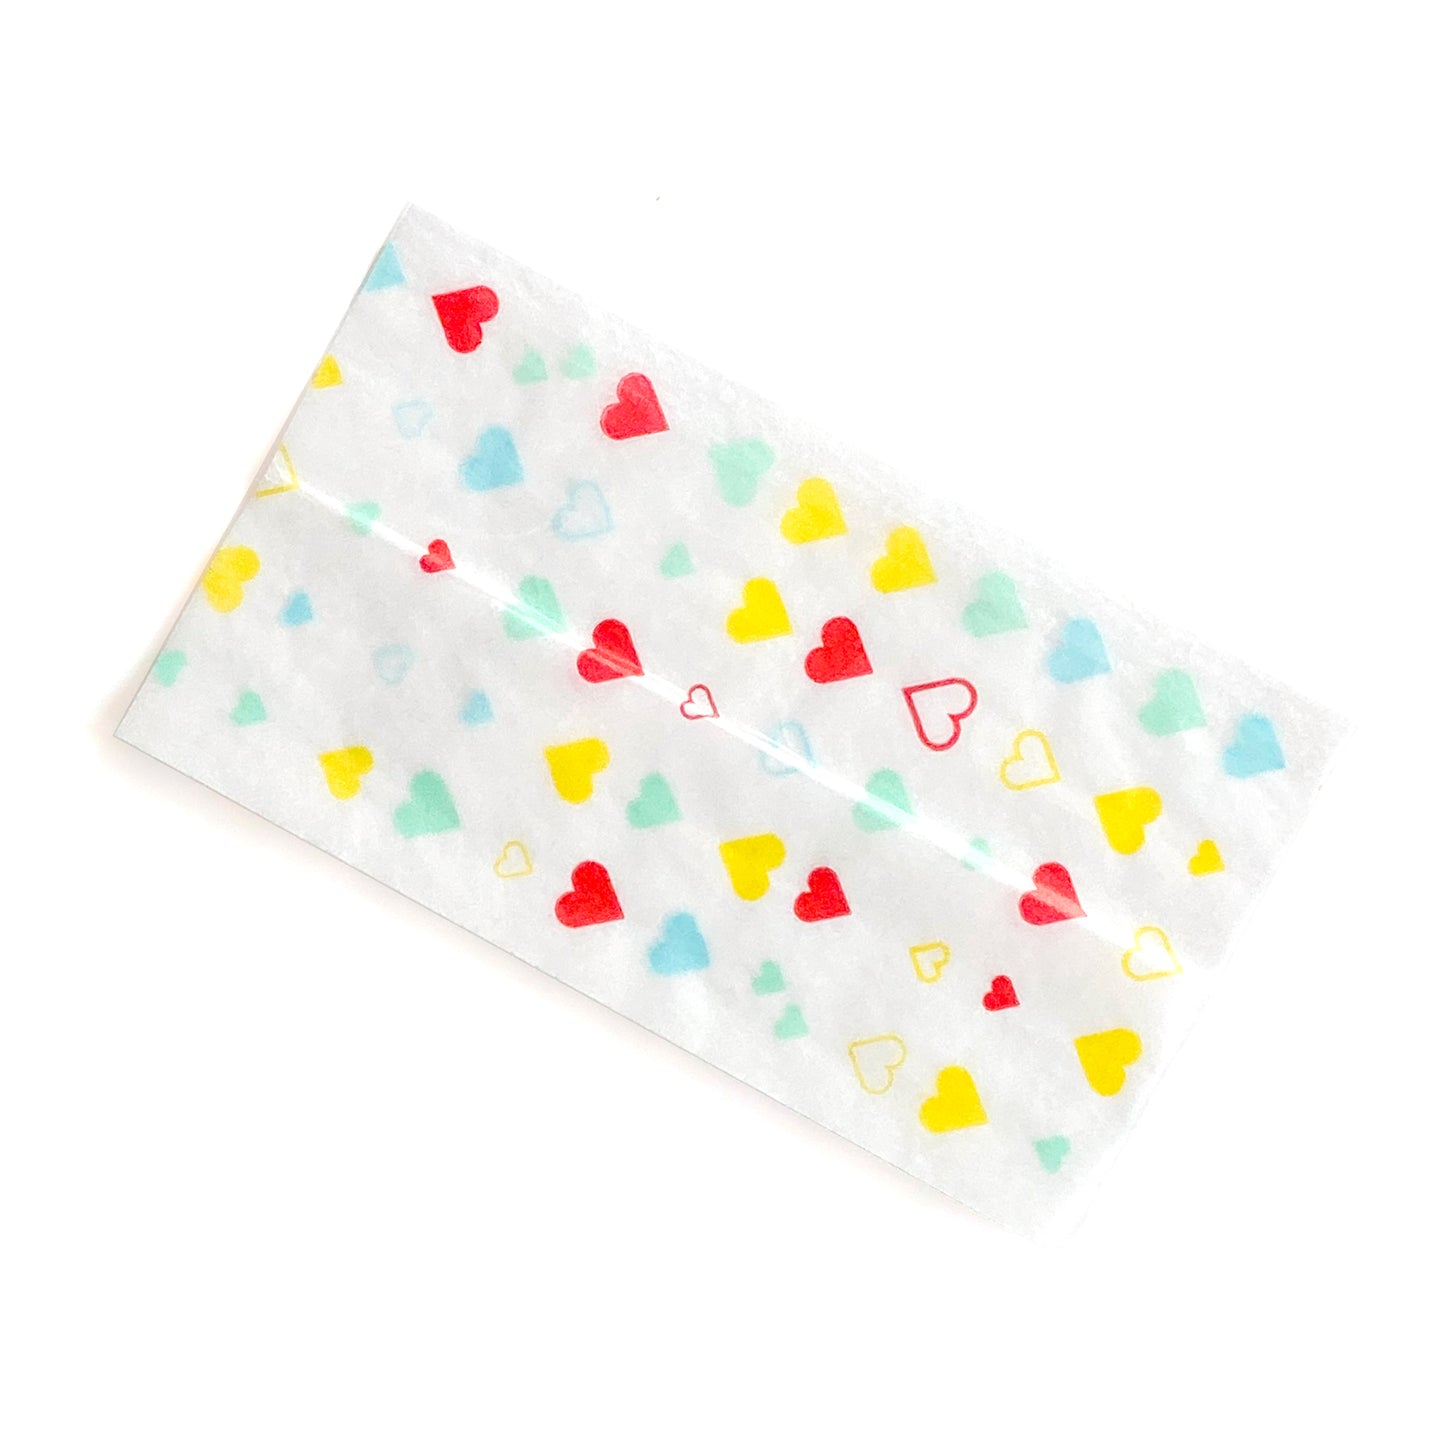 The (Ob)session Papers, set of 10: heart adorned rolling papers. These designer rolling papers are girly, pretty, vegan, cute, cool, standard size, high quality, even burn, natural dyes, best tasting, slow burn.